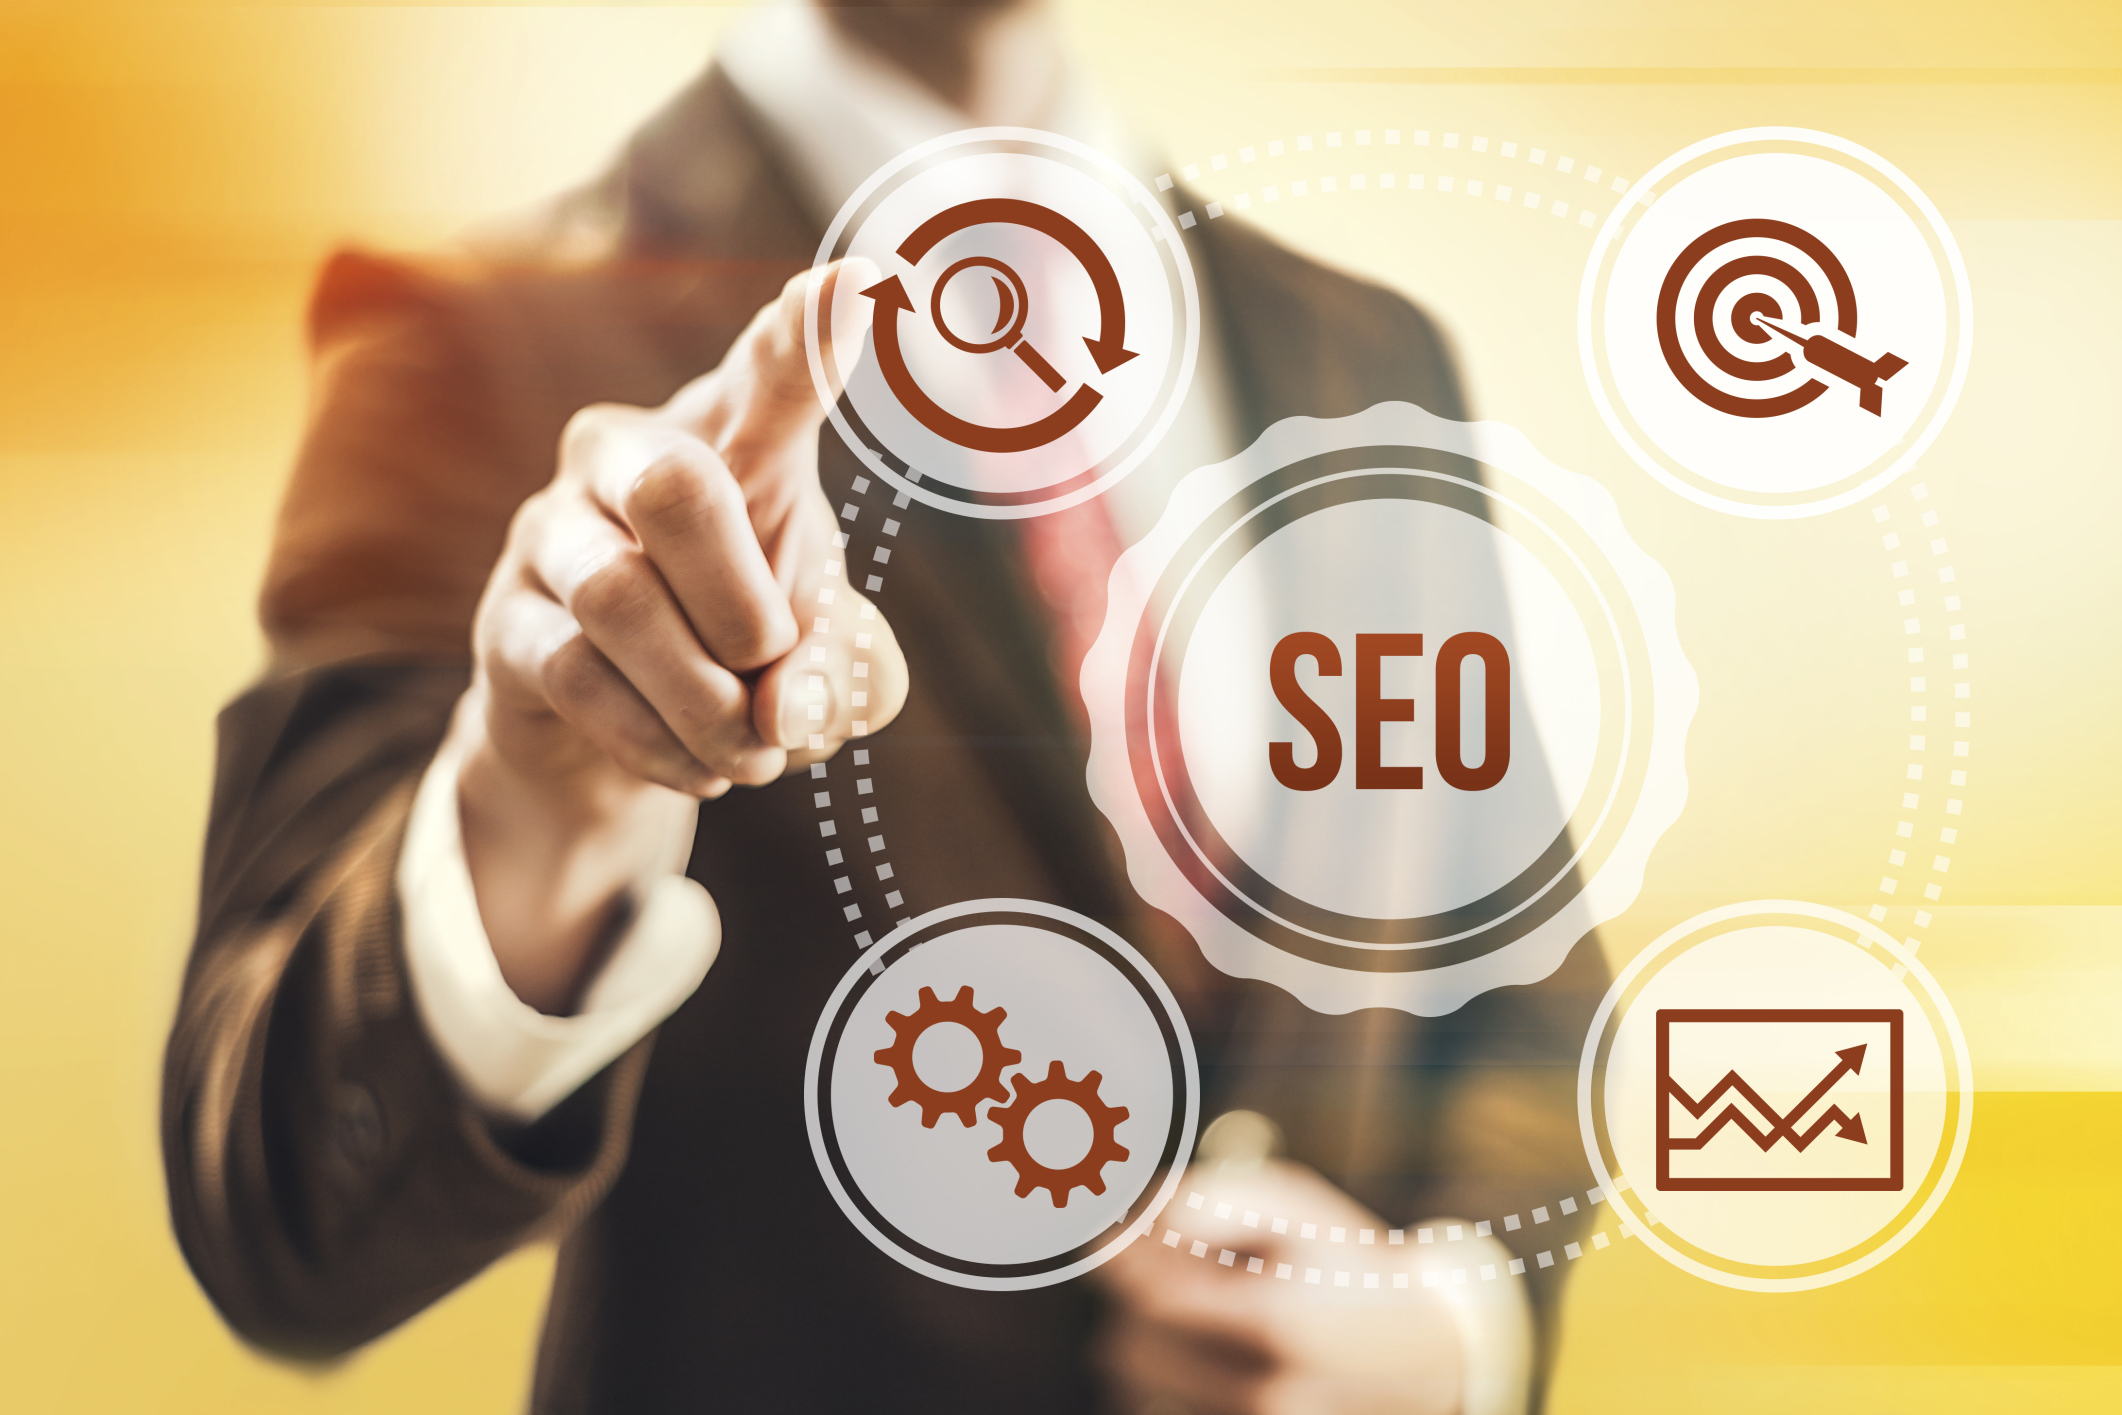 How to Determine the Best Keywords for SEO without Being an Expert